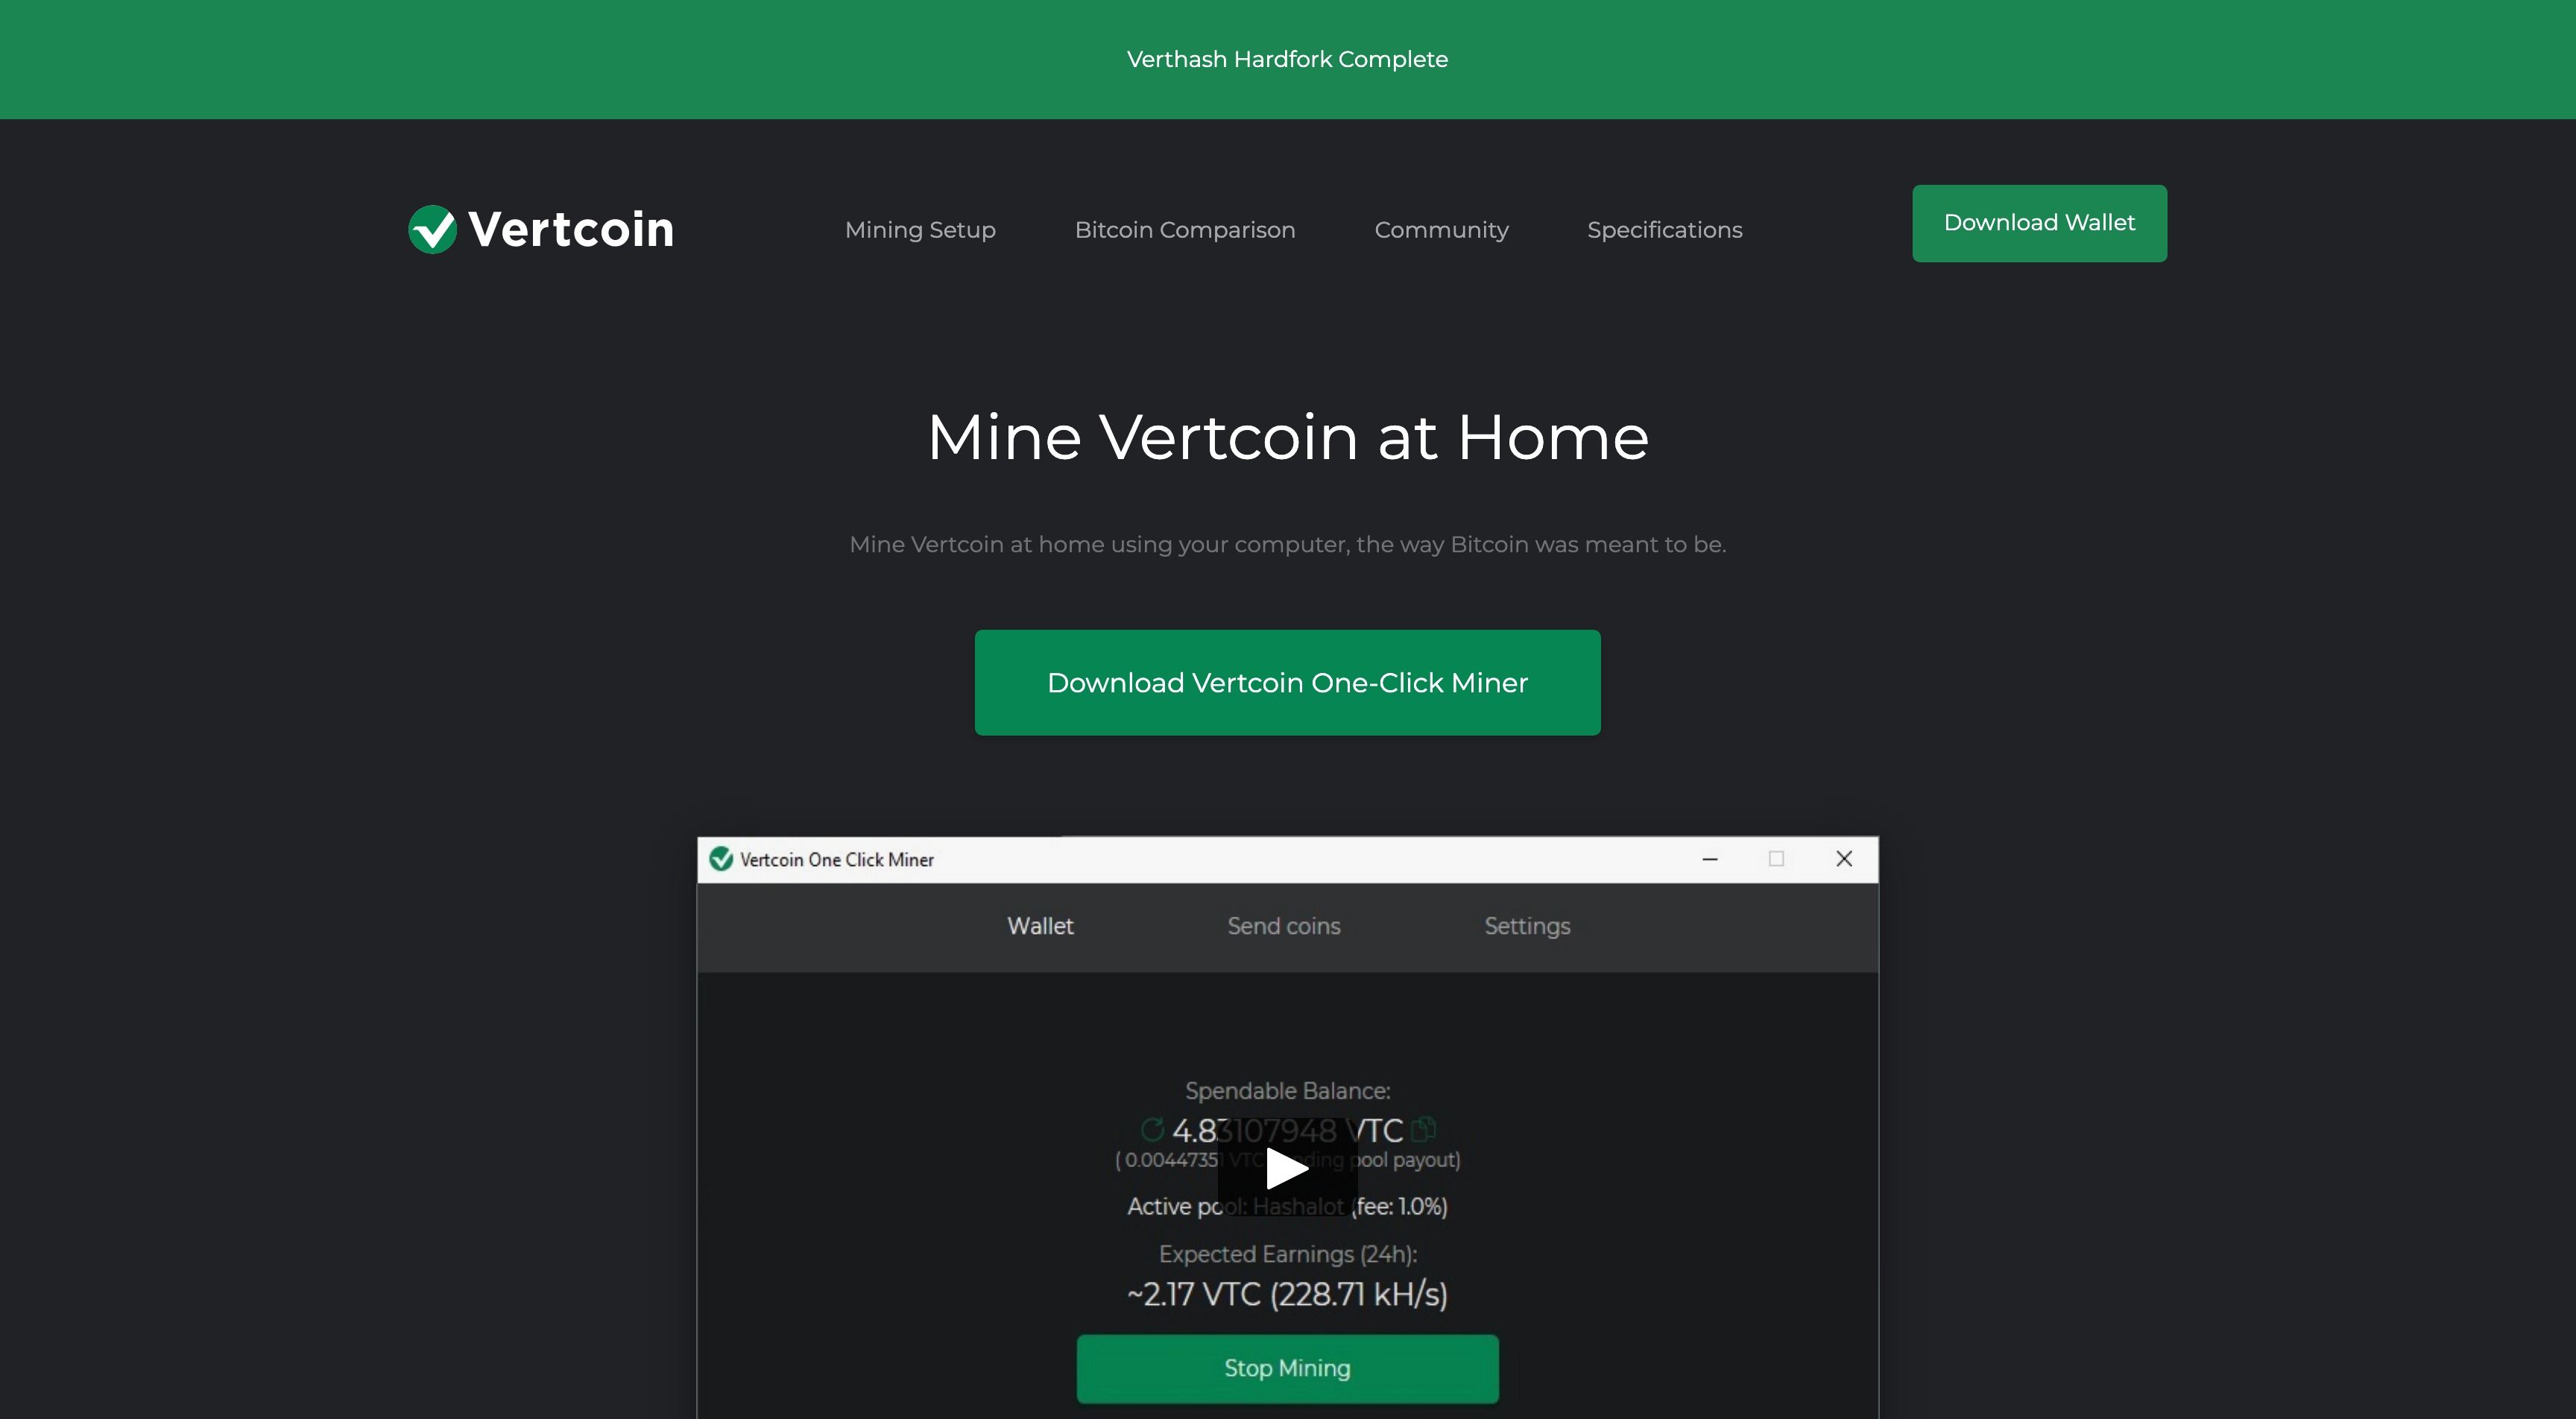 Screenshot of Vertcoin's home page